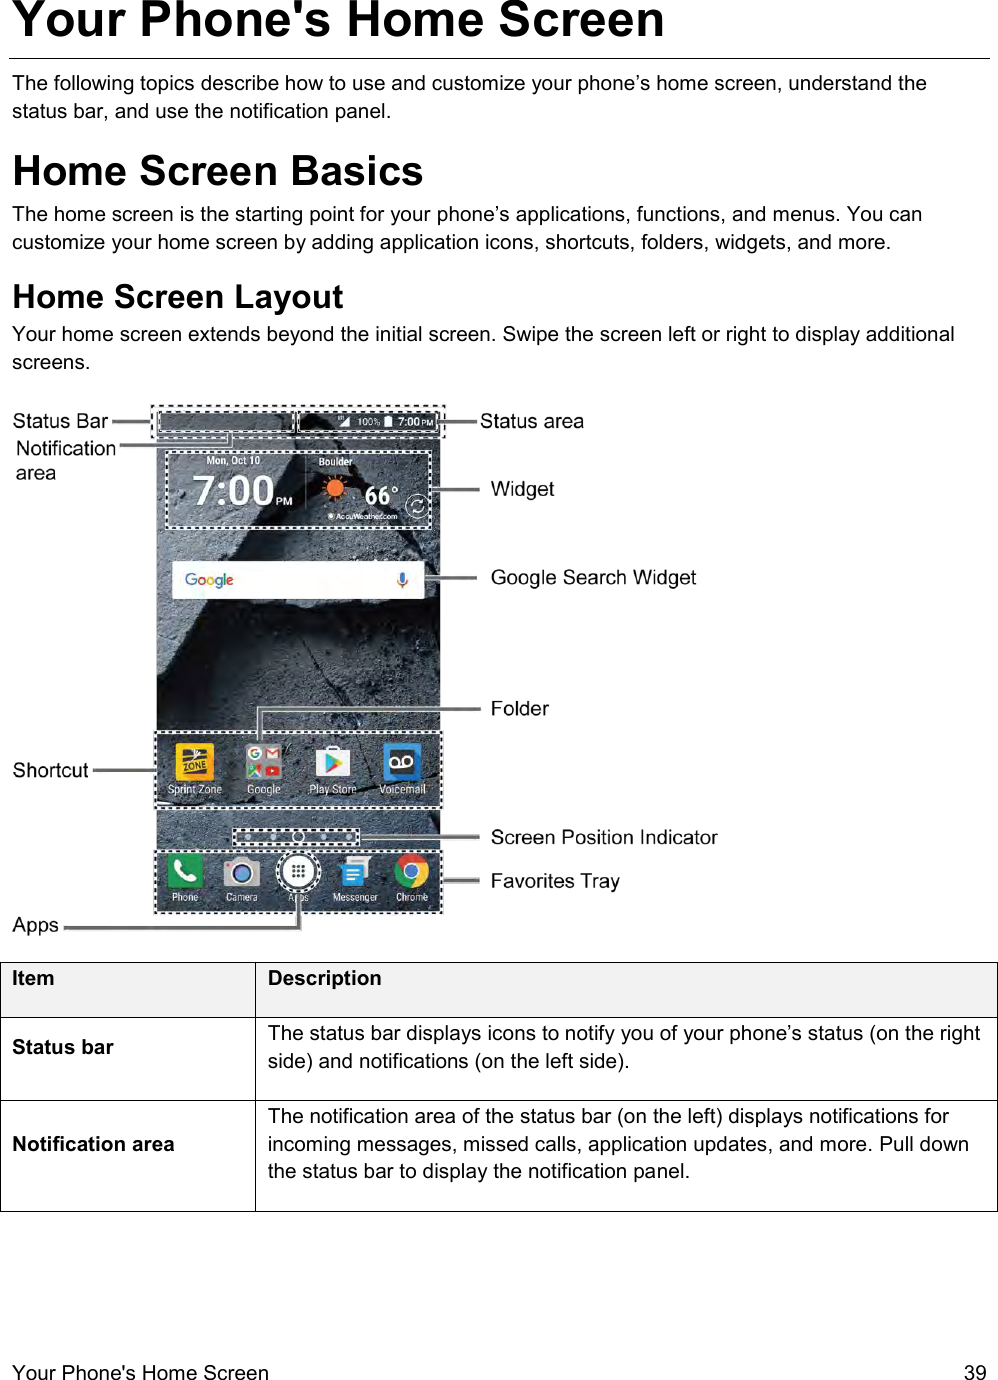  Your Phone&apos;s Home Screen  39 Your Phone&apos;s Home Screen The following topics describe how to use and customize your phone’s home screen, understand the status bar, and use the notification panel. Home Screen Basics The home screen is the starting point for your phone’s applications, functions, and menus. You can customize your home screen by adding application icons, shortcuts, folders, widgets, and more.  Home Screen Layout Your home screen extends beyond the initial screen. Swipe the screen left or right to display additional screens.   Item Description Status bar  The status bar displays icons to notify you of your phone’s status (on the right side) and notifications (on the left side).  Notification area  The notification area of the status bar (on the left) displays notifications for incoming messages, missed calls, application updates, and more. Pull down the status bar to display the notification panel. 